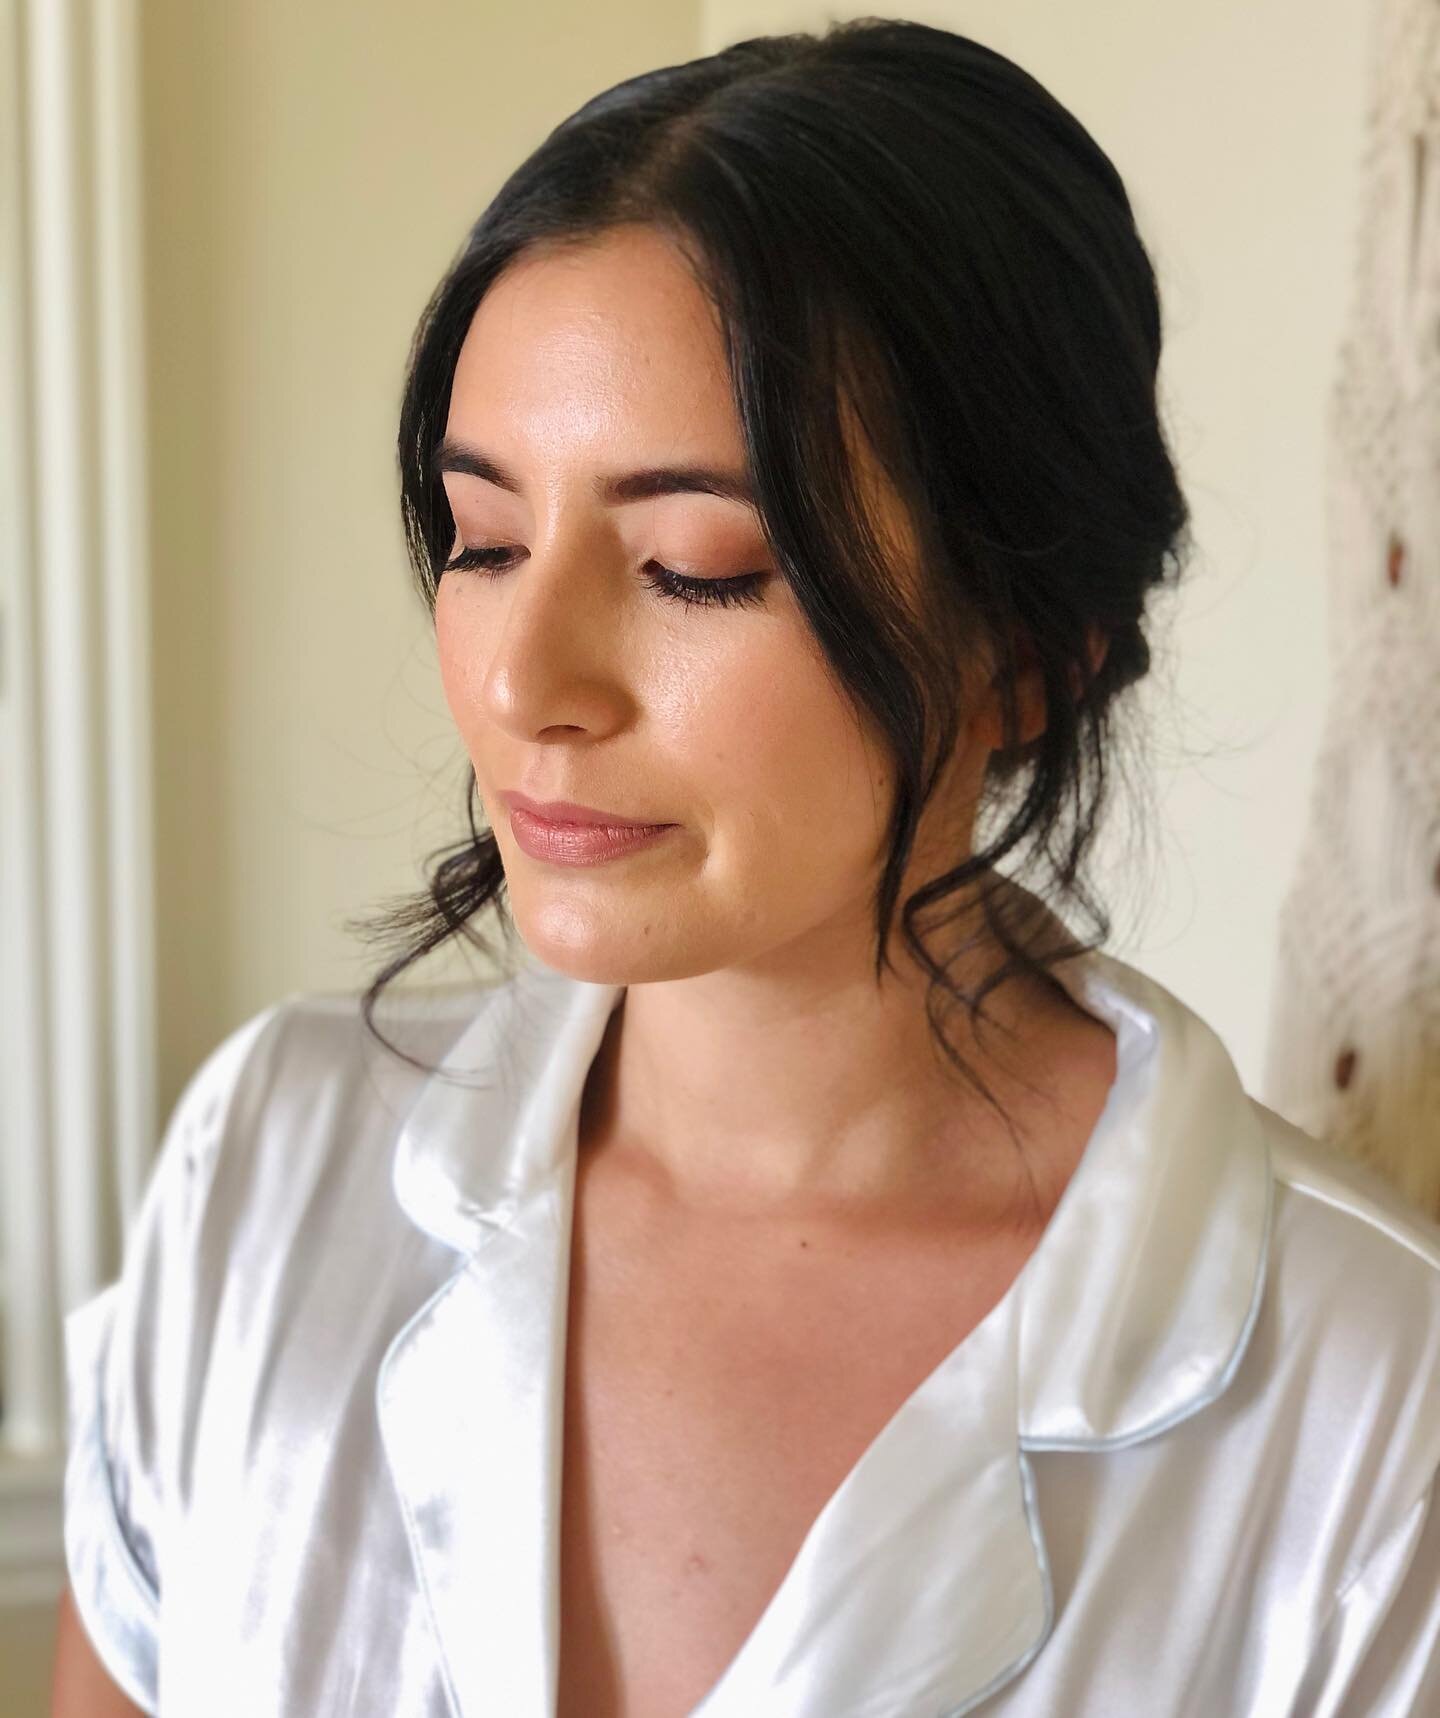 Brides like Emily make my job easy. Not only is she naturally beautiful, but is such a joy to be around. Got to glam her up with @bayareabeautiful today!! Congrats @efrougster 💞
.
.
#bride2today #misstomrs #tietheknot #ido #makeupbyadele #mubabride 